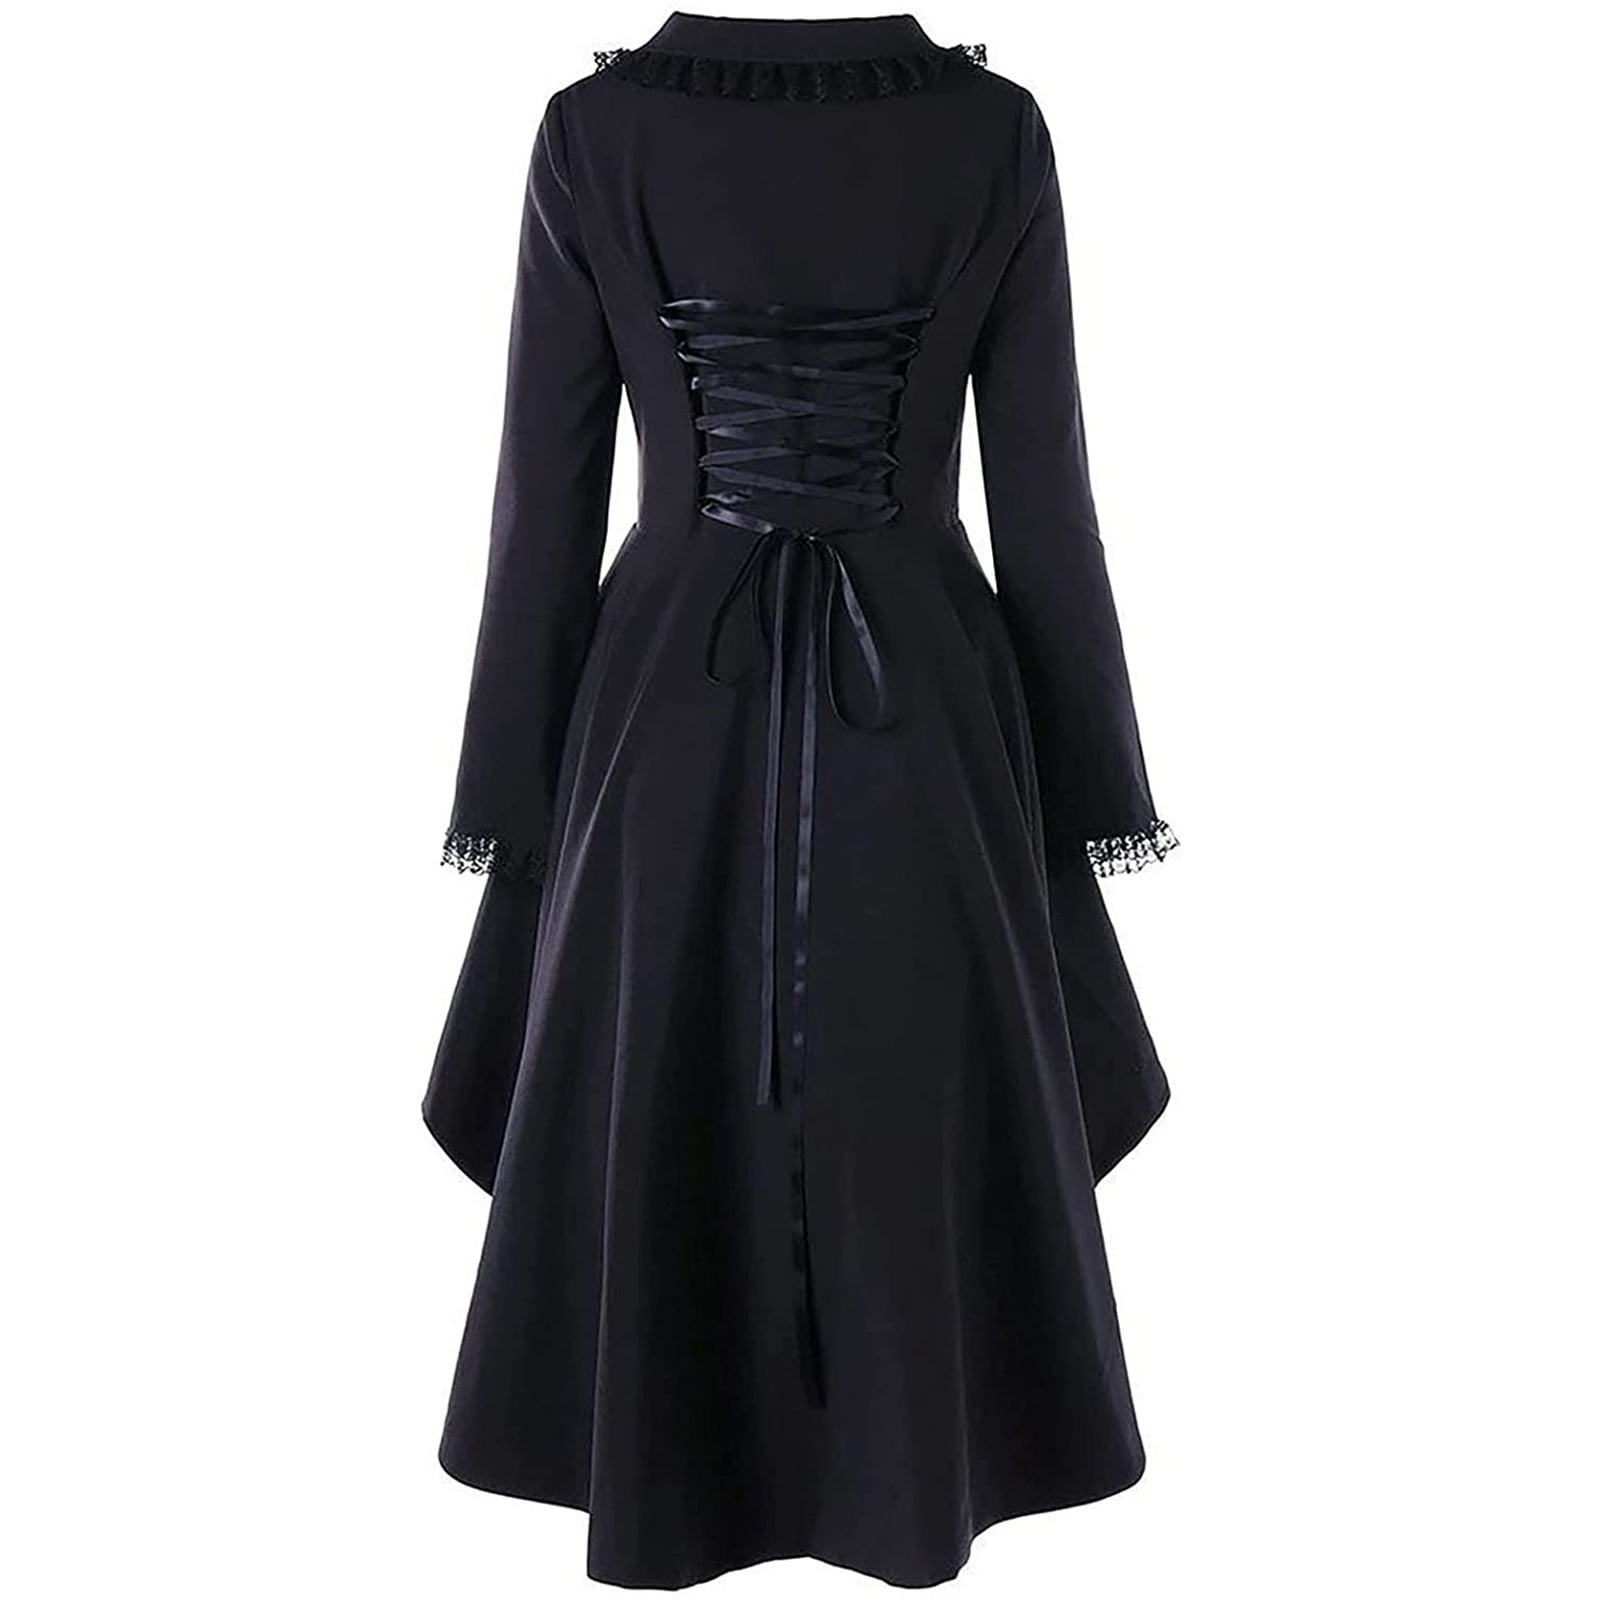 Ladies Gothic Jackets Vintage, Steampunk Tailcoat for Women Long Sleeve ...